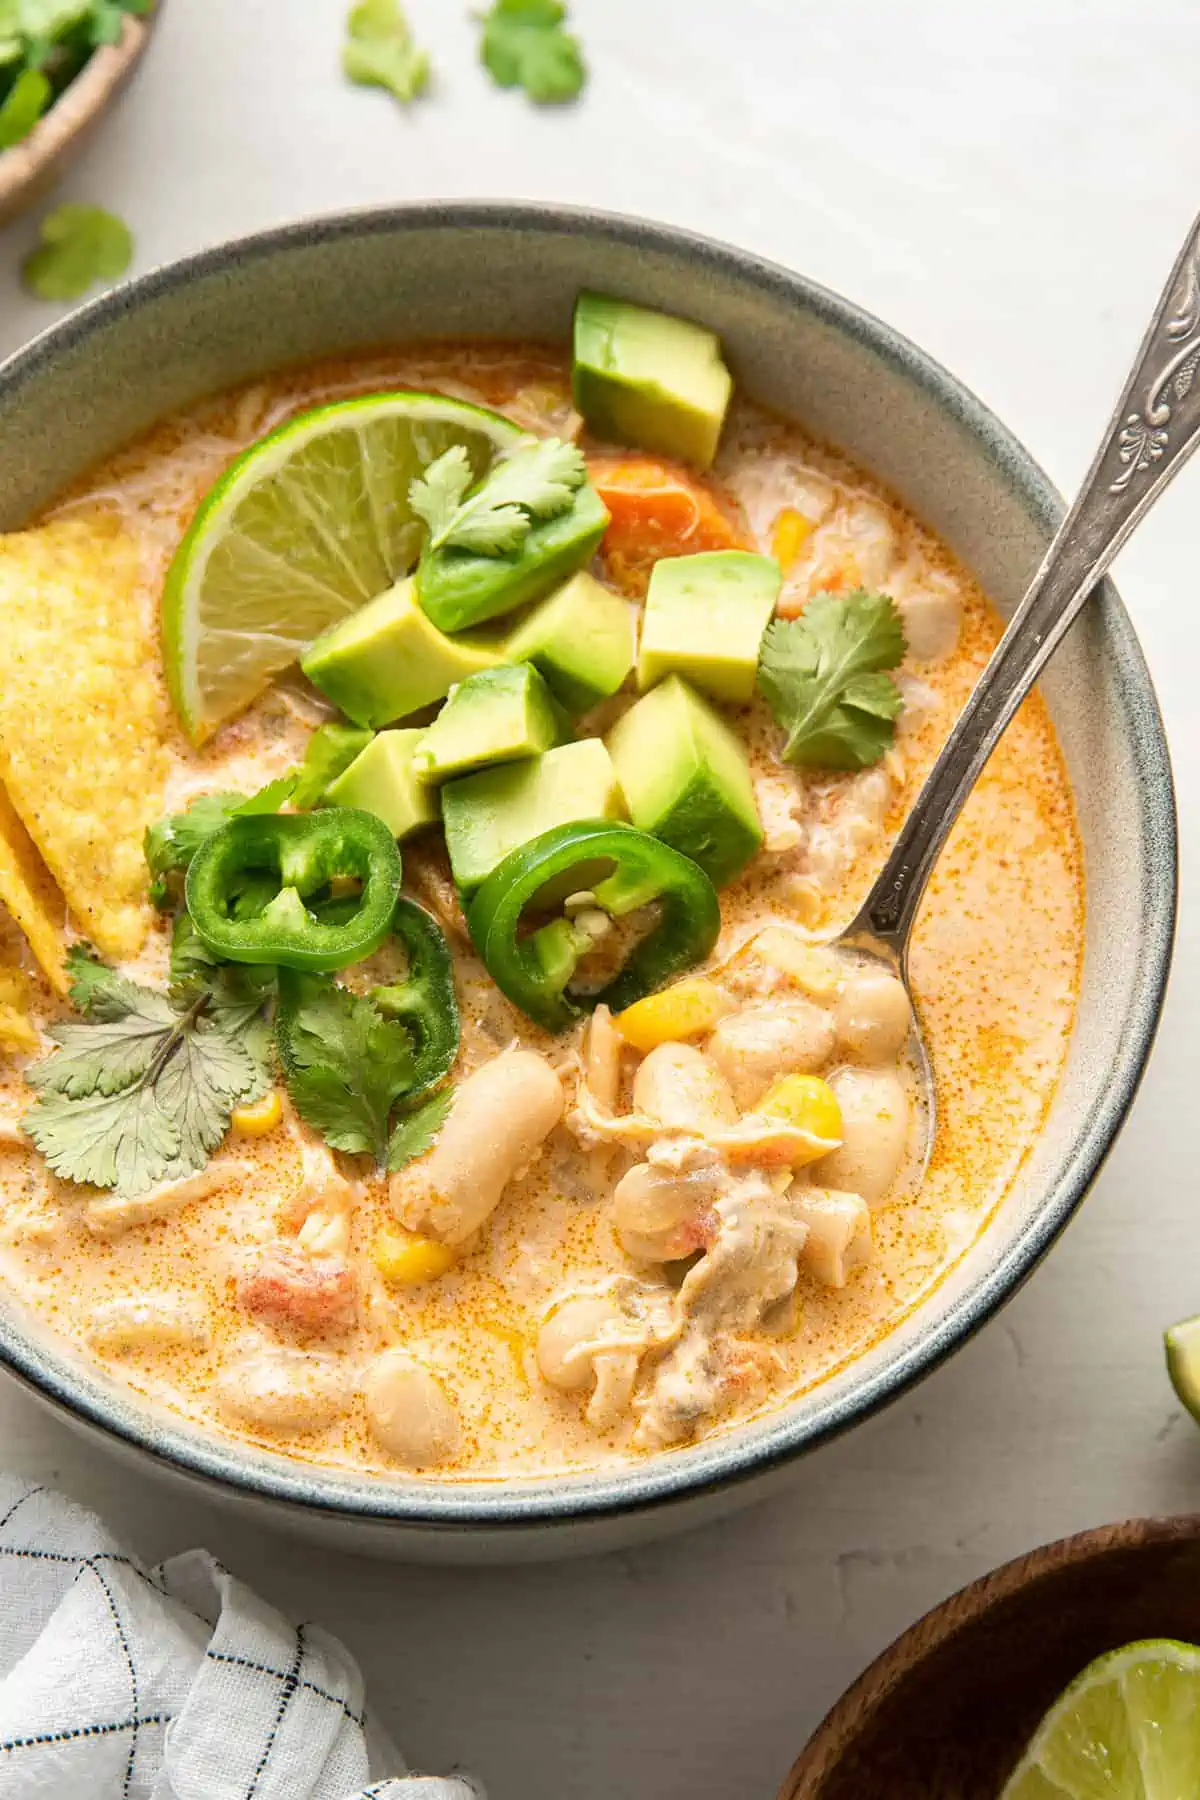 A bowl of white chicken chili garnished with chilis, cilantro, avocado, and a lime spice, with a spoon in the bowl